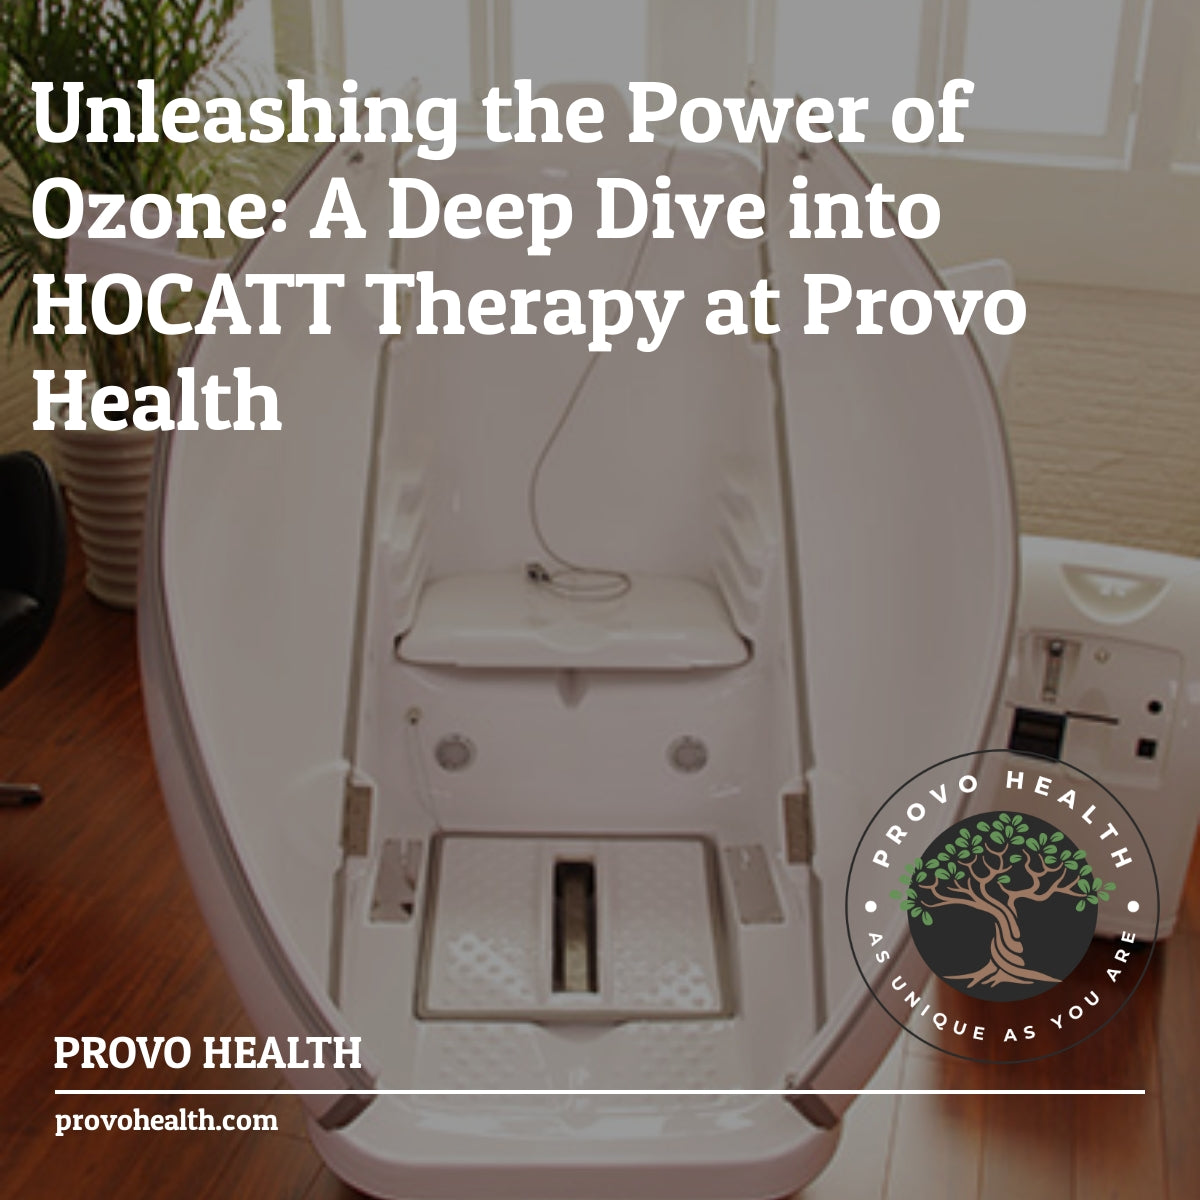 Unleashing the Power of Ozone: A Deep Dive into HOCATT Therapy at Provo Health